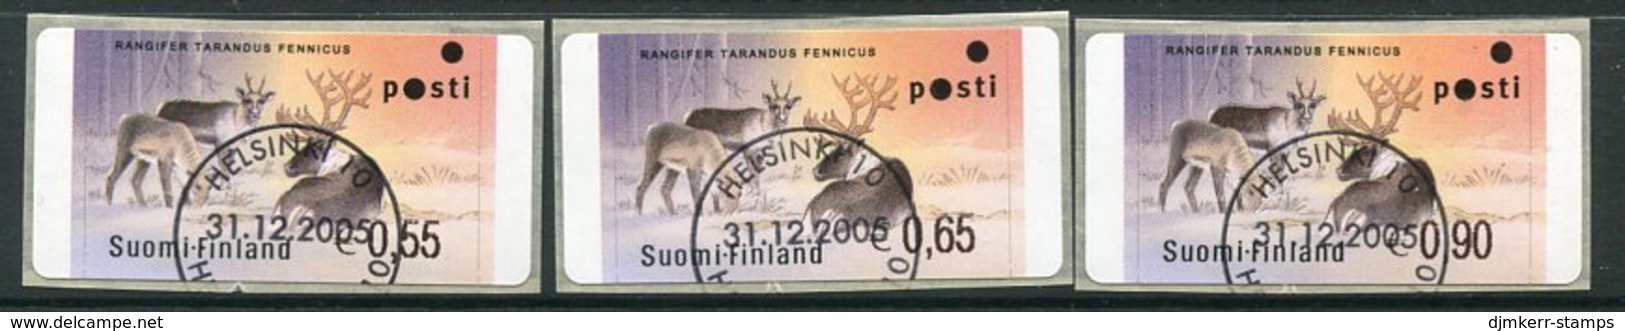 FINLAND 2003 Forests ATM, Three Values Used.  Michel 40 - Vignette [ATM]